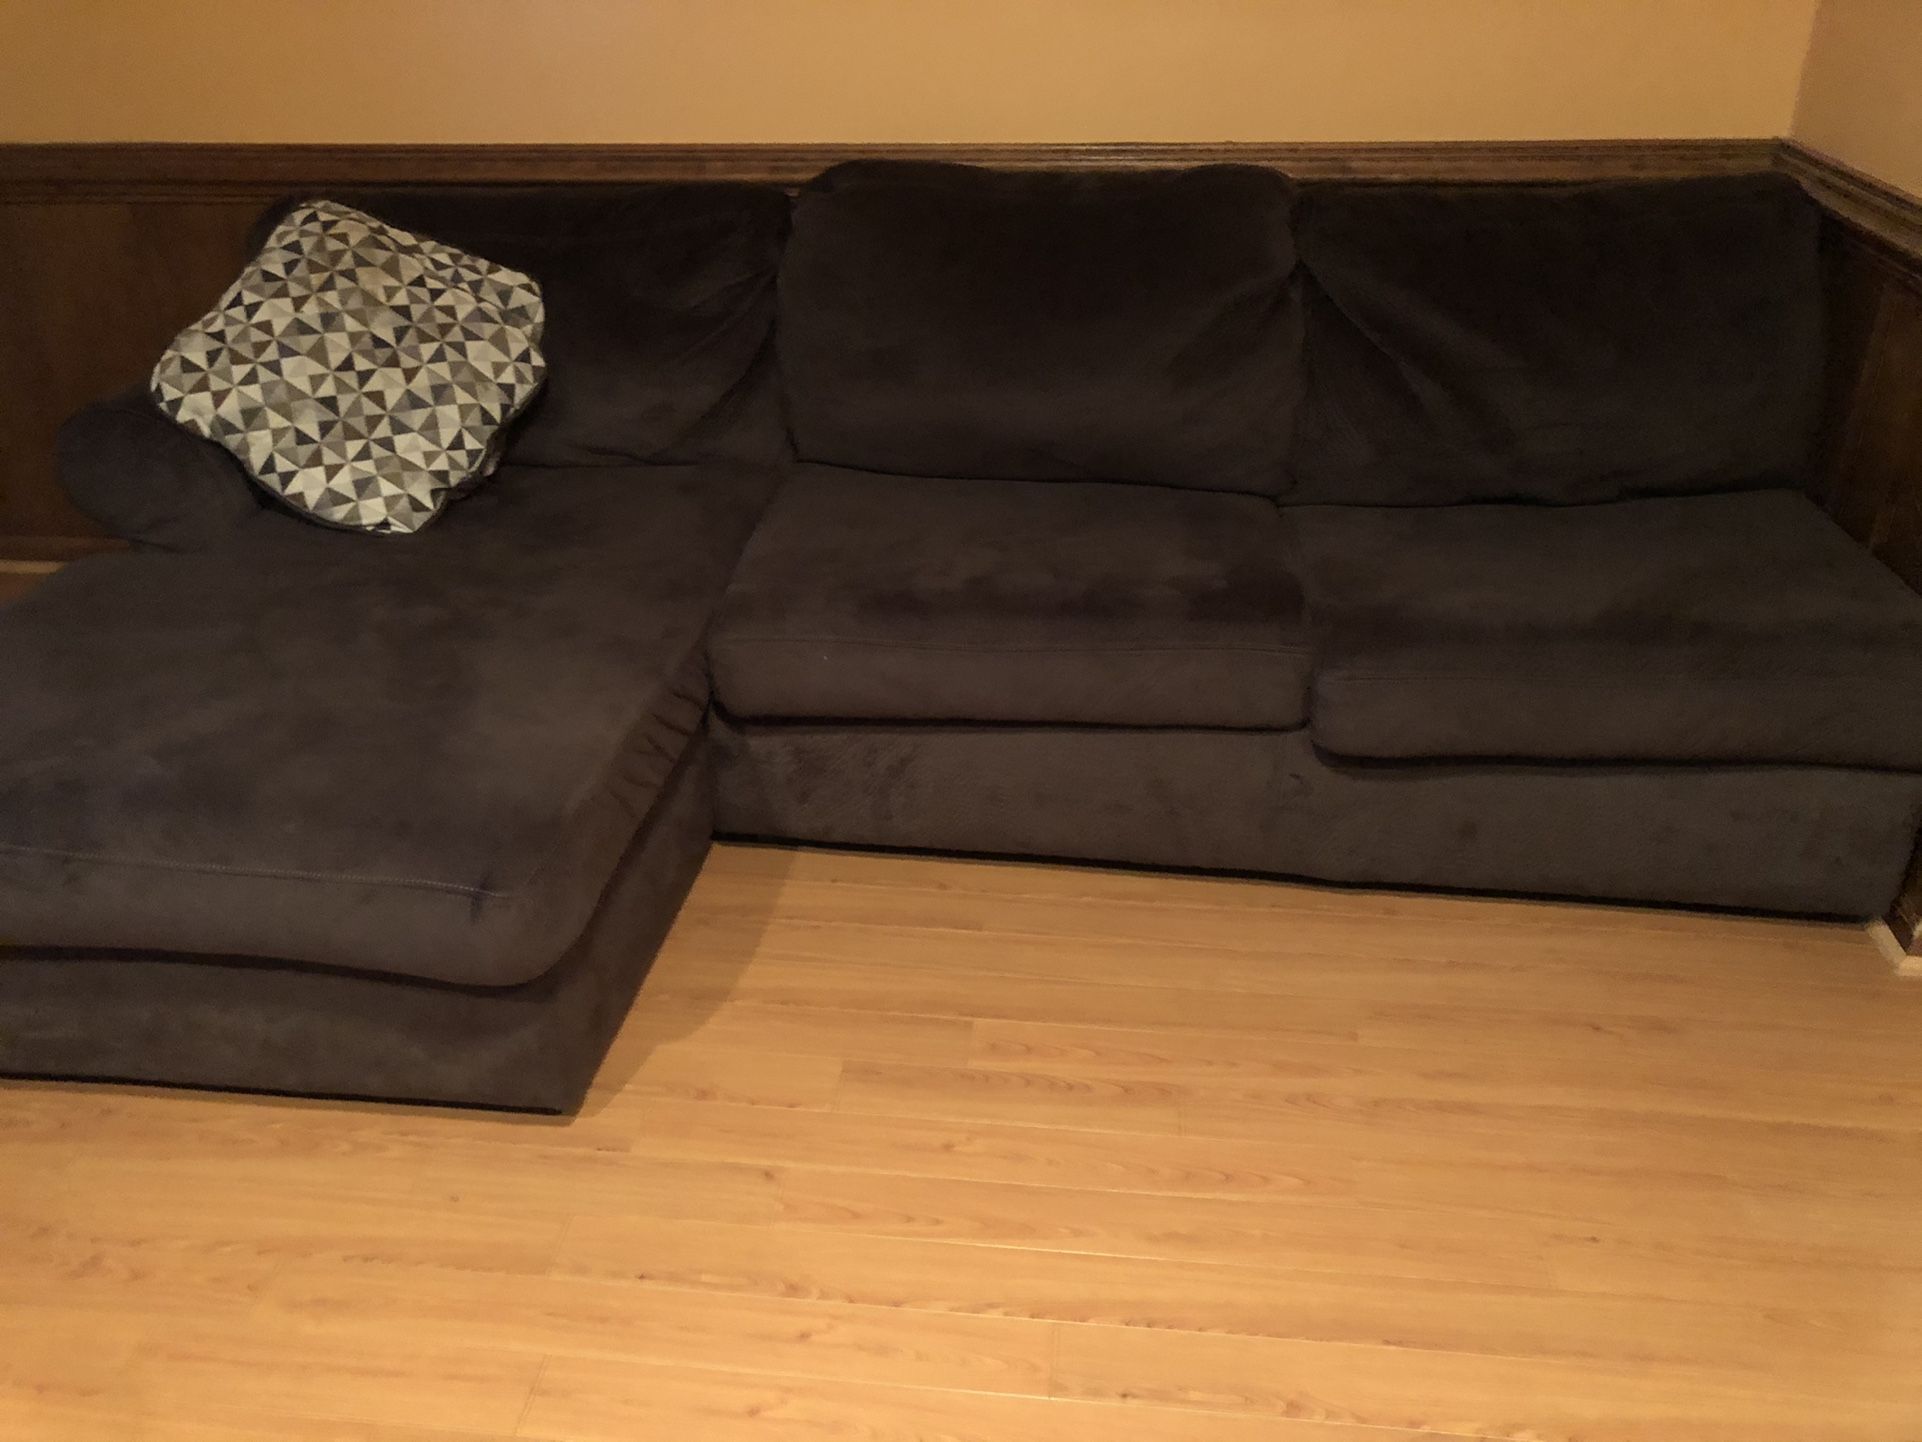 Free Sectional